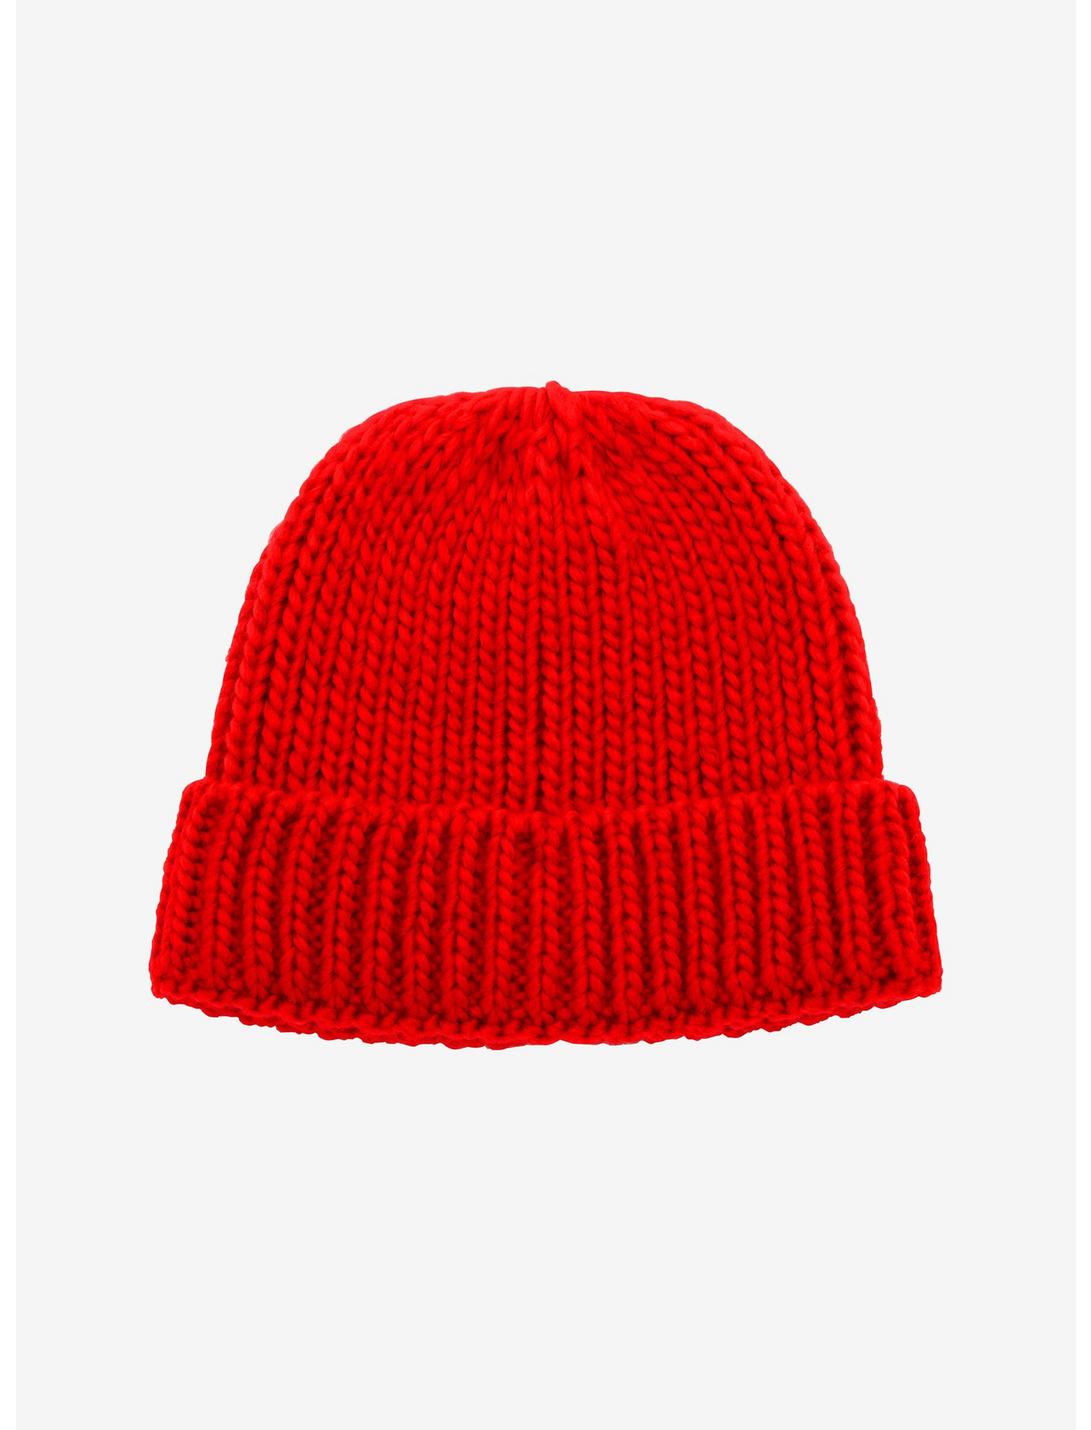 Red Knit Short Cap Beanie | Hot Topic